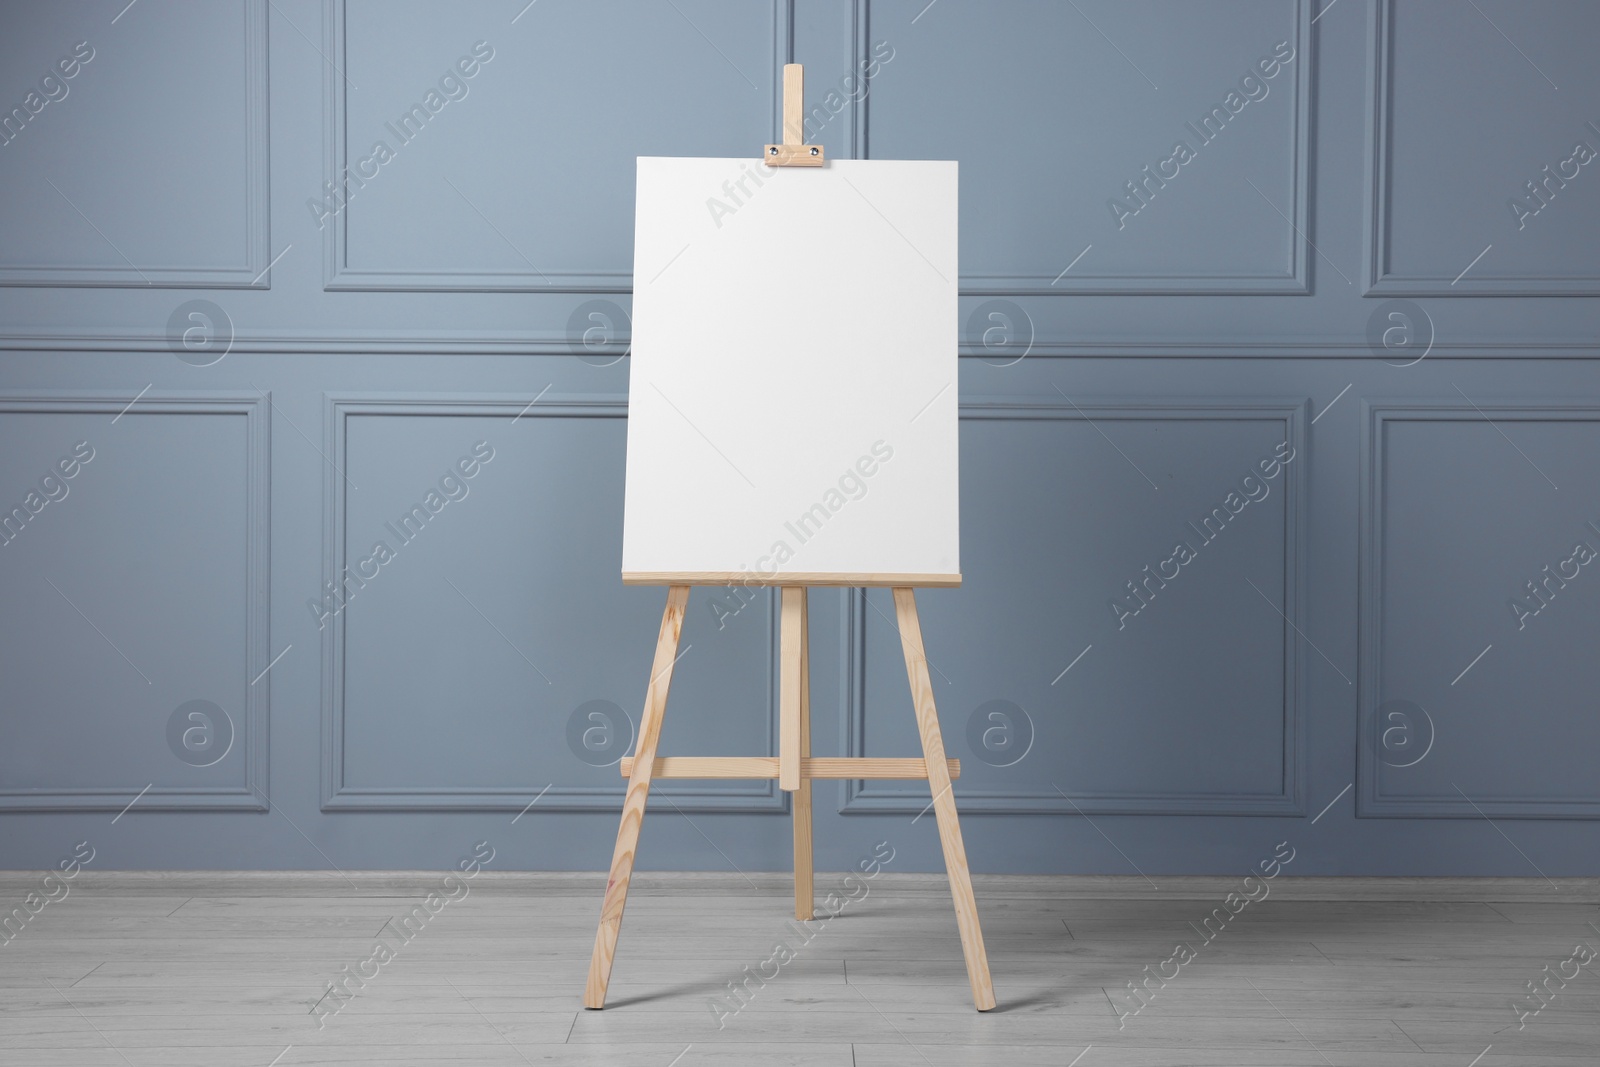 Photo of Wooden easel with blank canvas near grey wall indoors